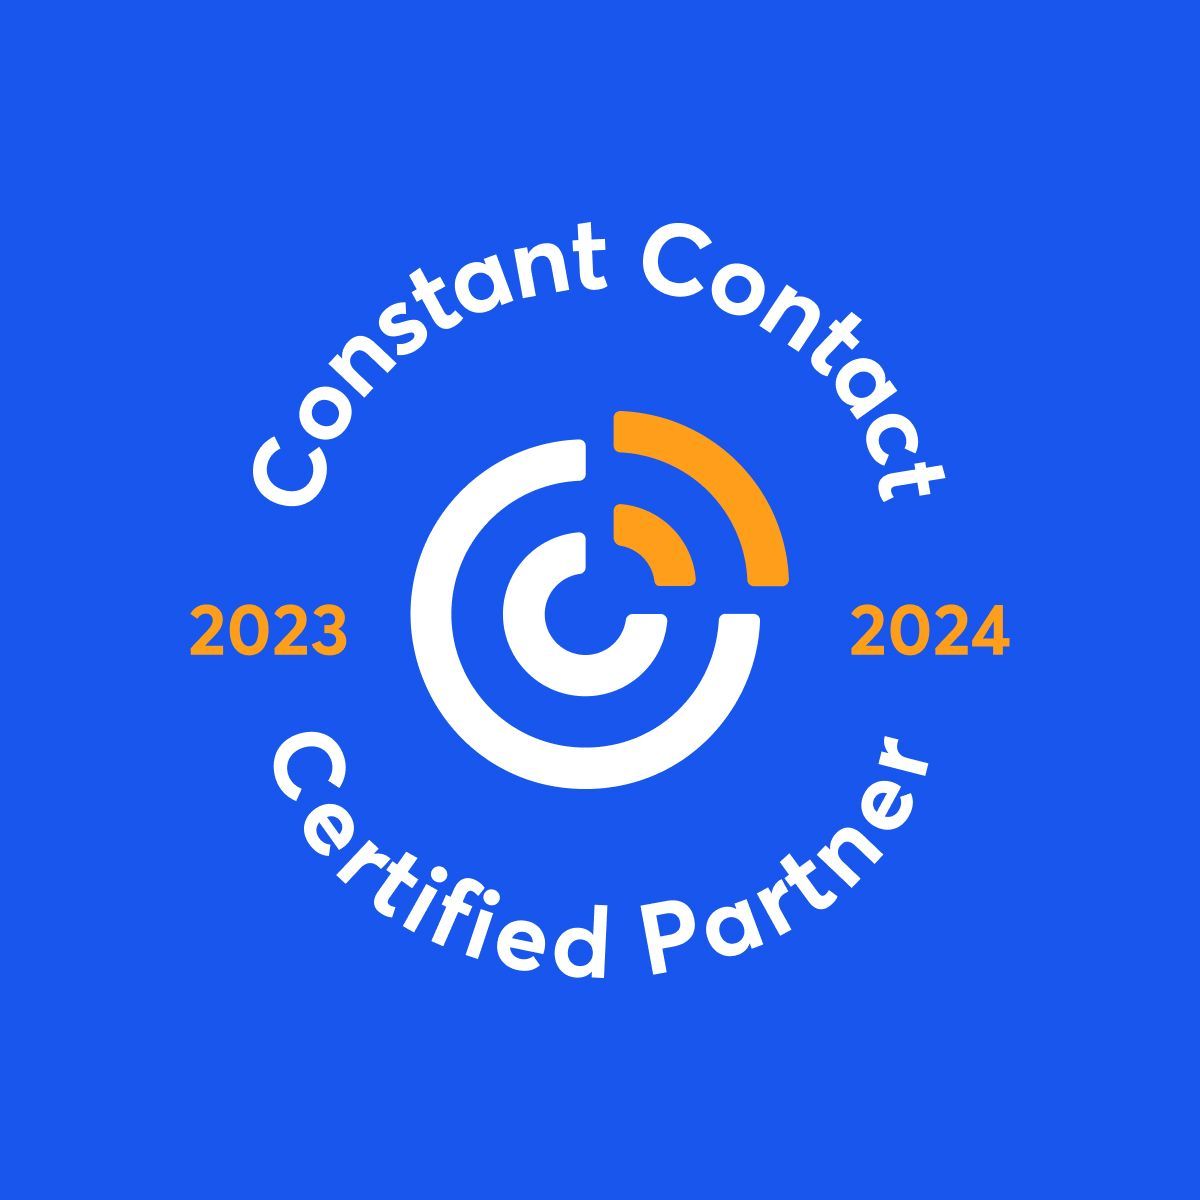 a constant contact certified partner logo on a blue background